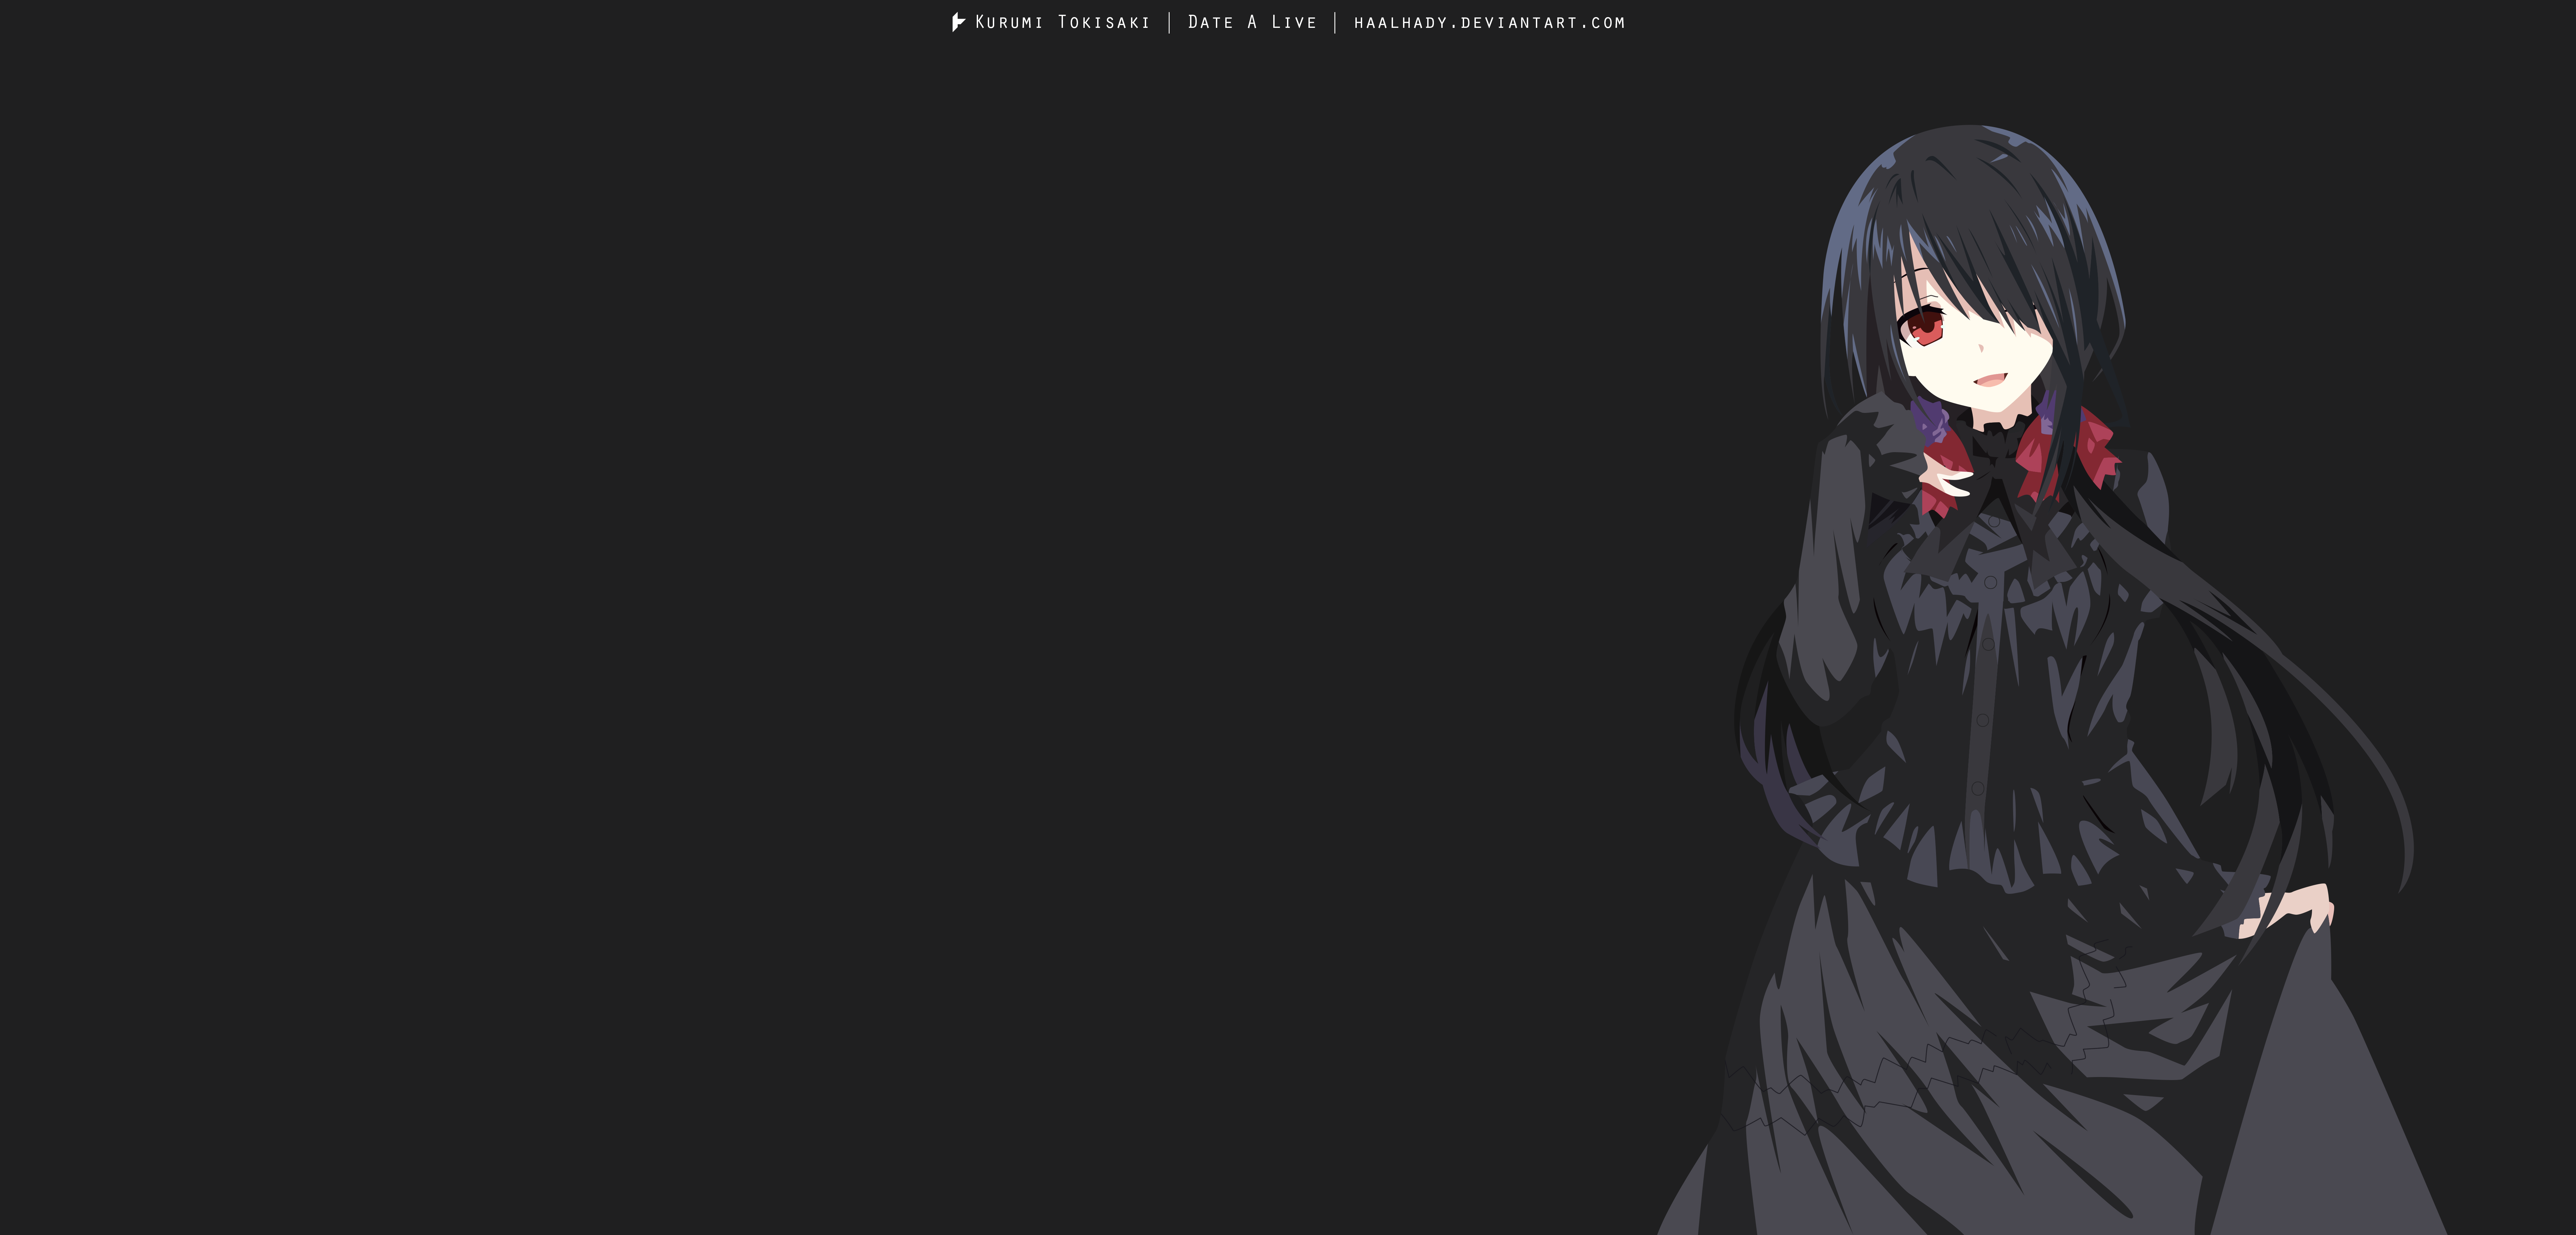 Date A Live 4k Ultra HD Wallpaper by Hadziq Alhady